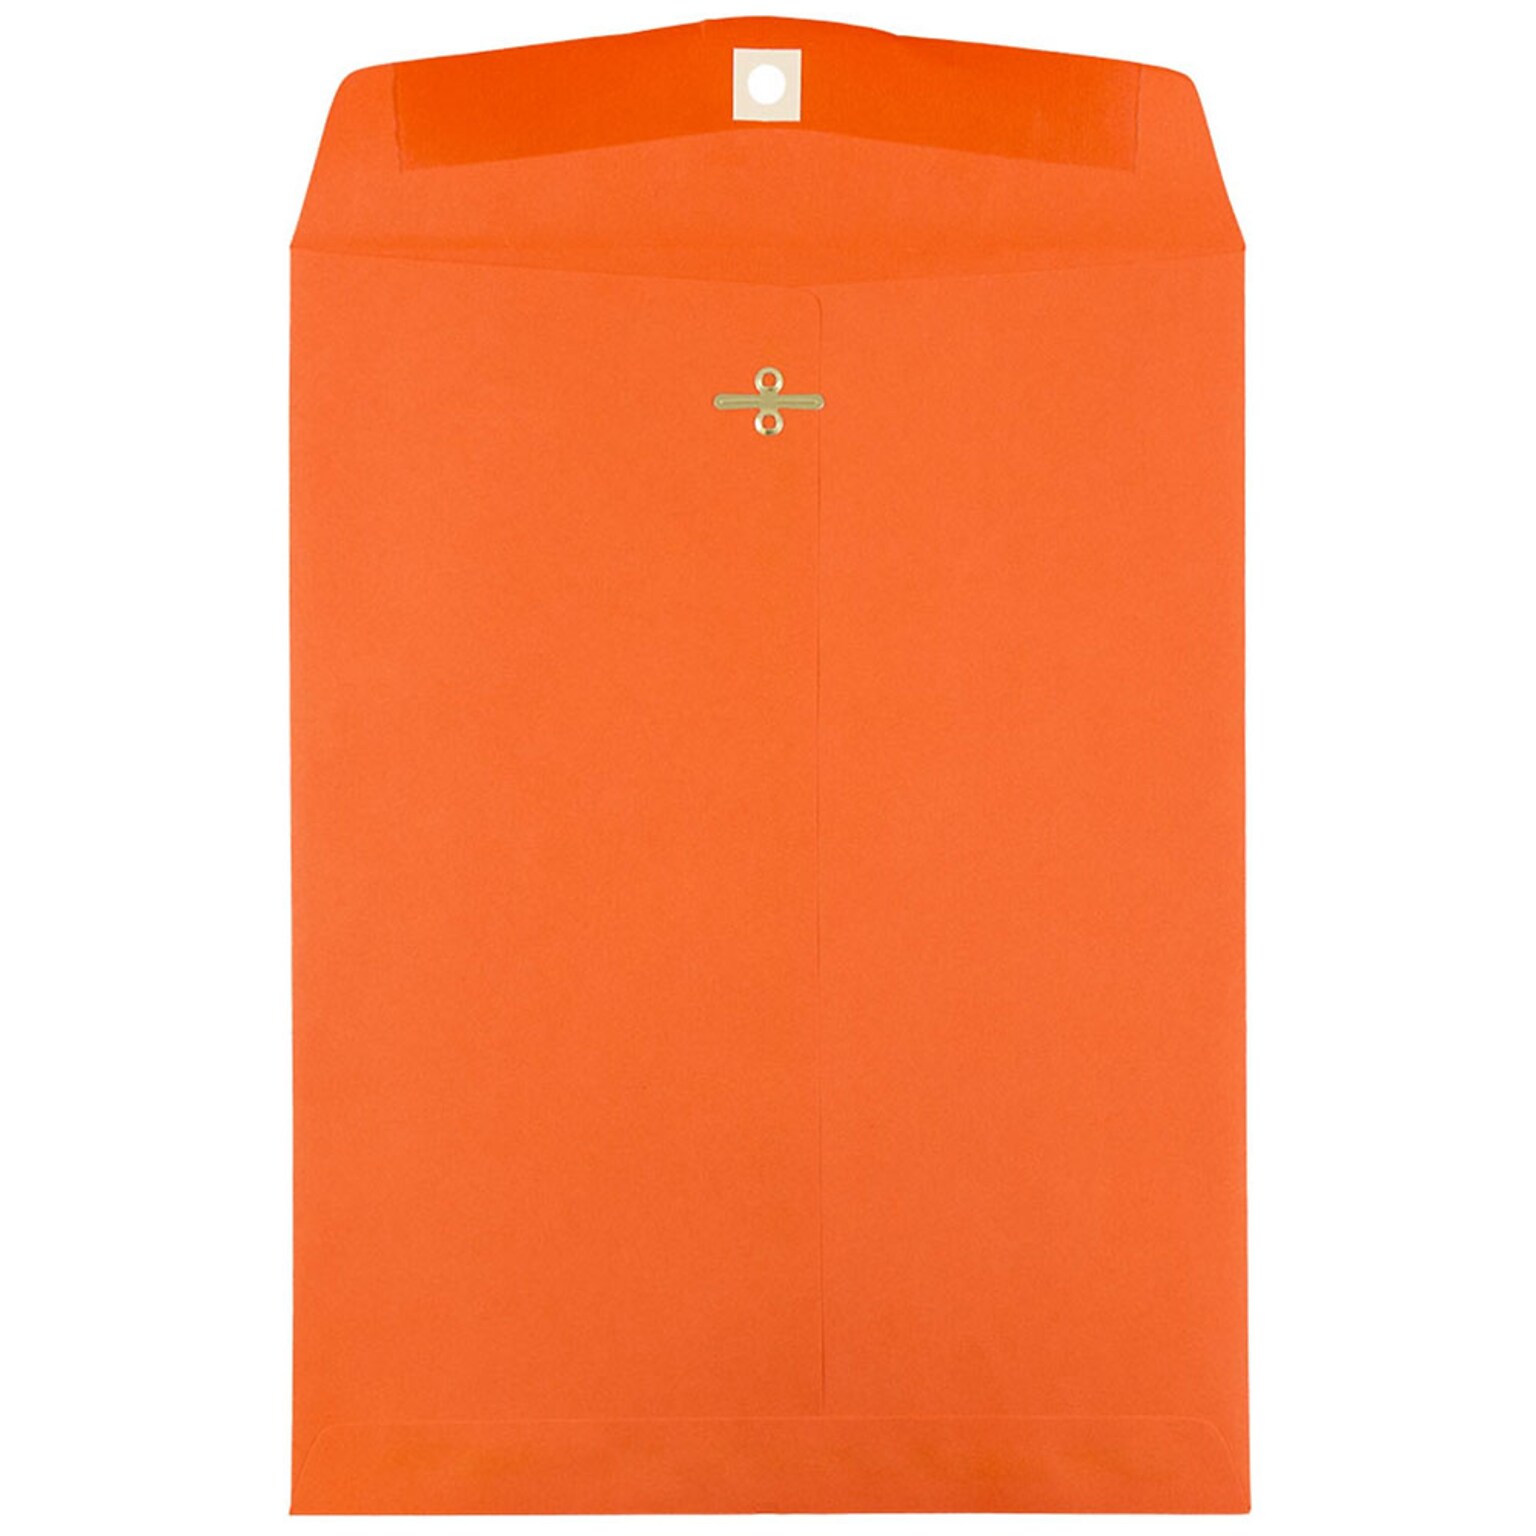 JAM Paper 10 x 13 Open End Catalog Colored Envelopes with Clasp Closure, Orange Recycled, 10/Pack (913745B)